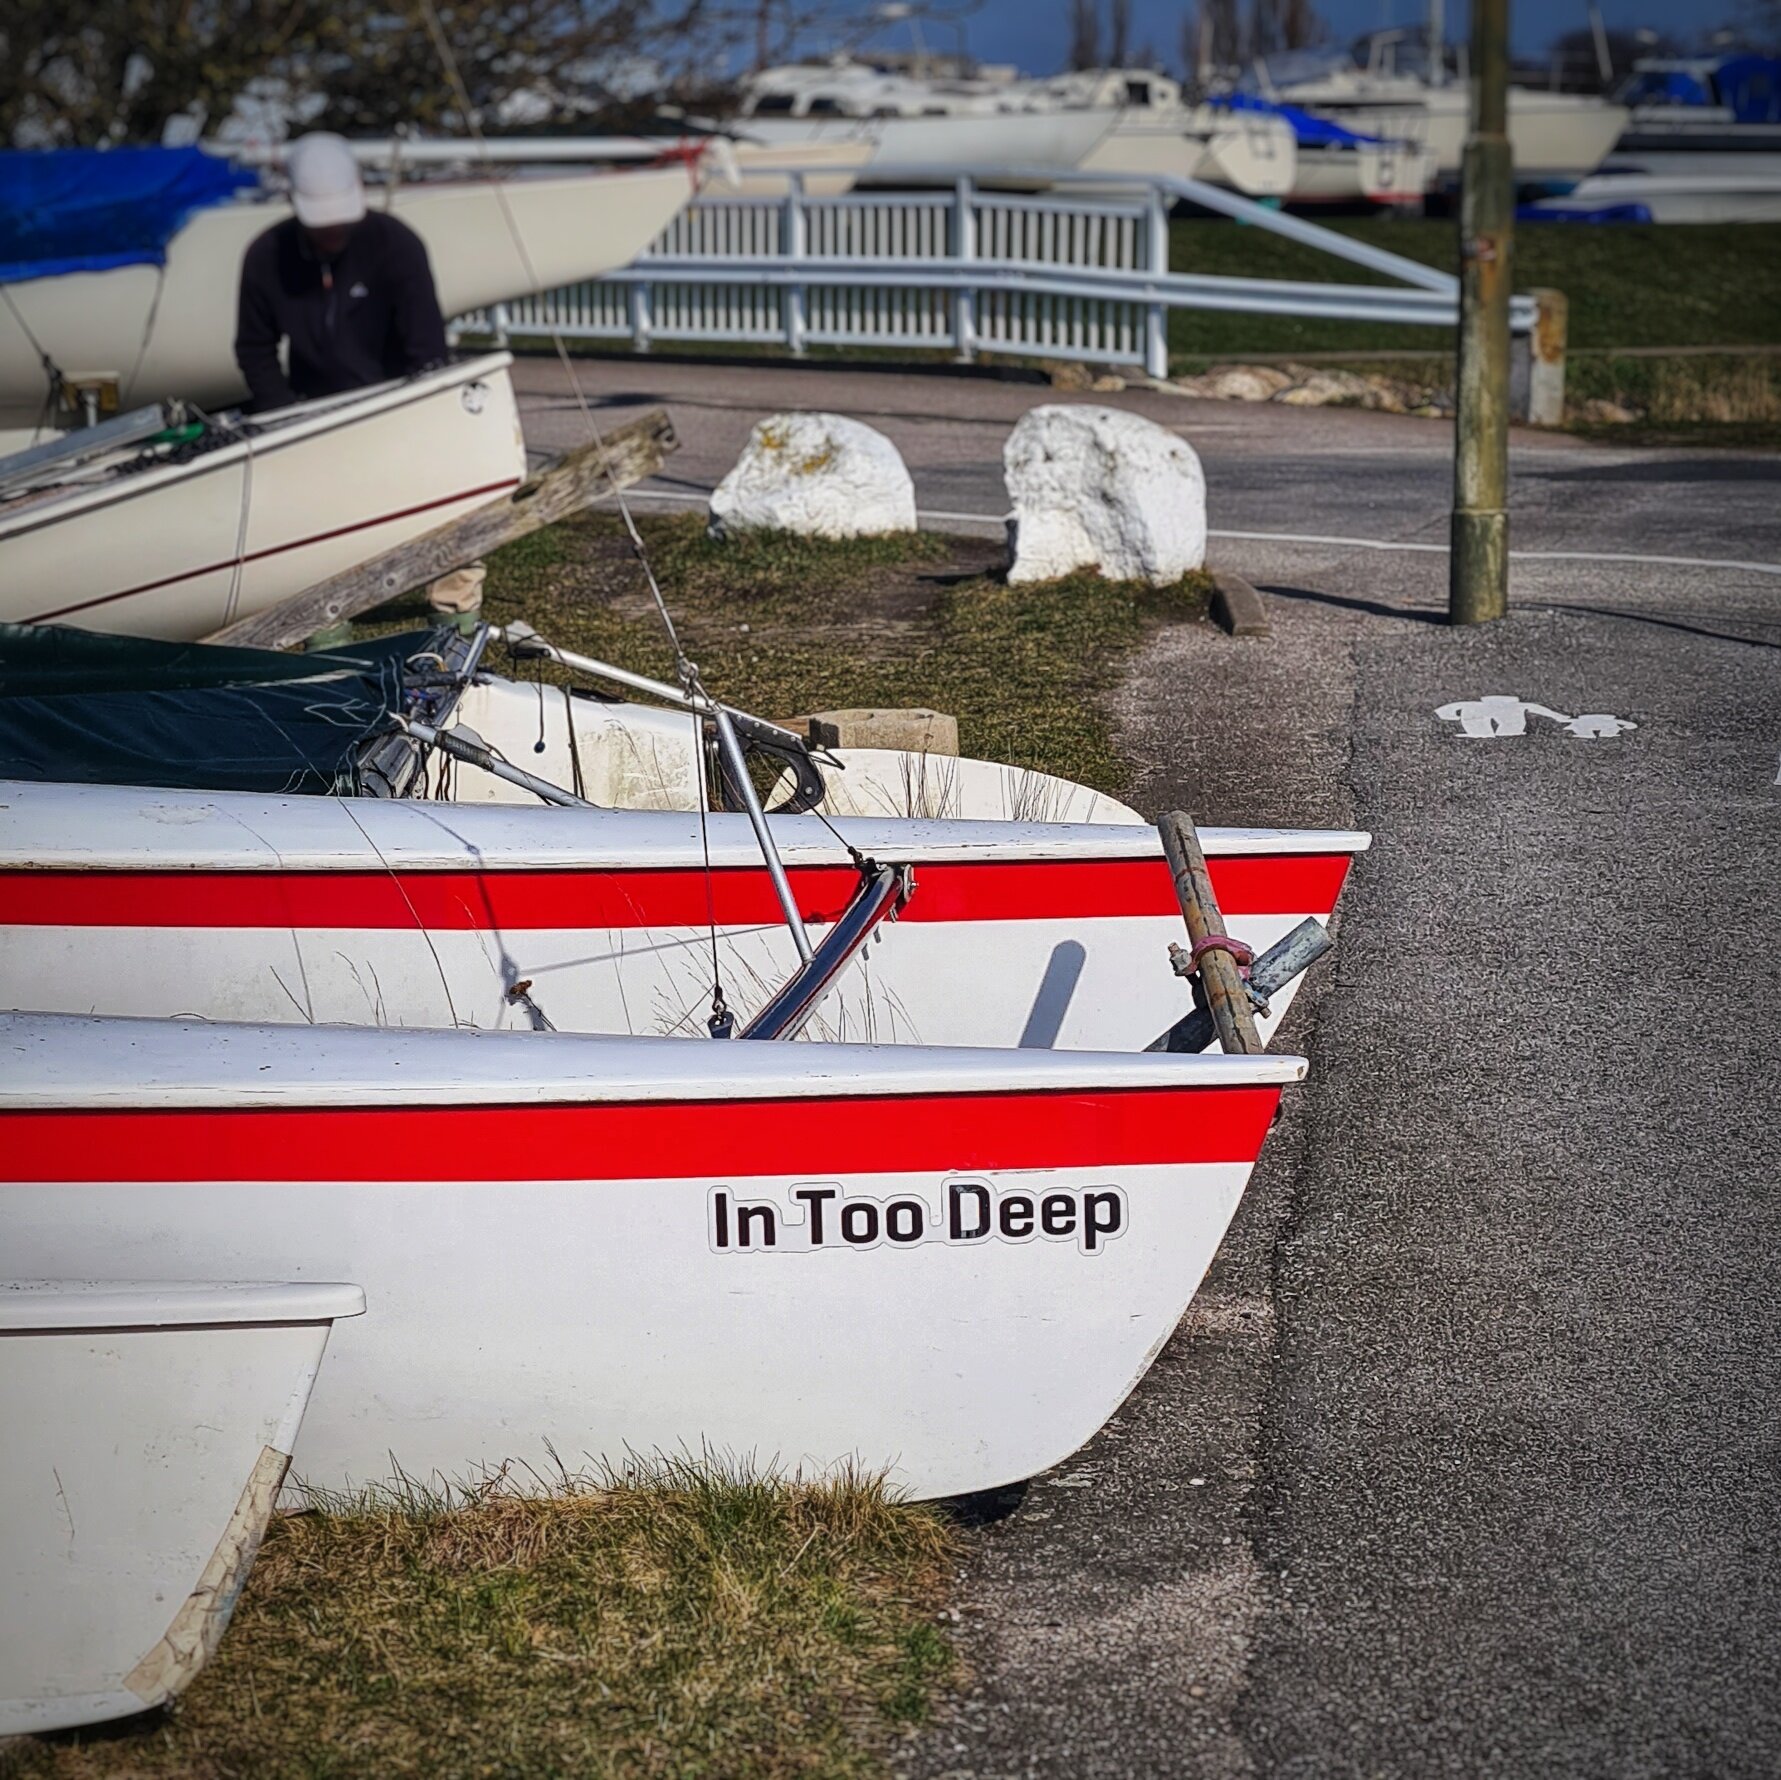 Day 91 - April 1: That's a name for a boat?